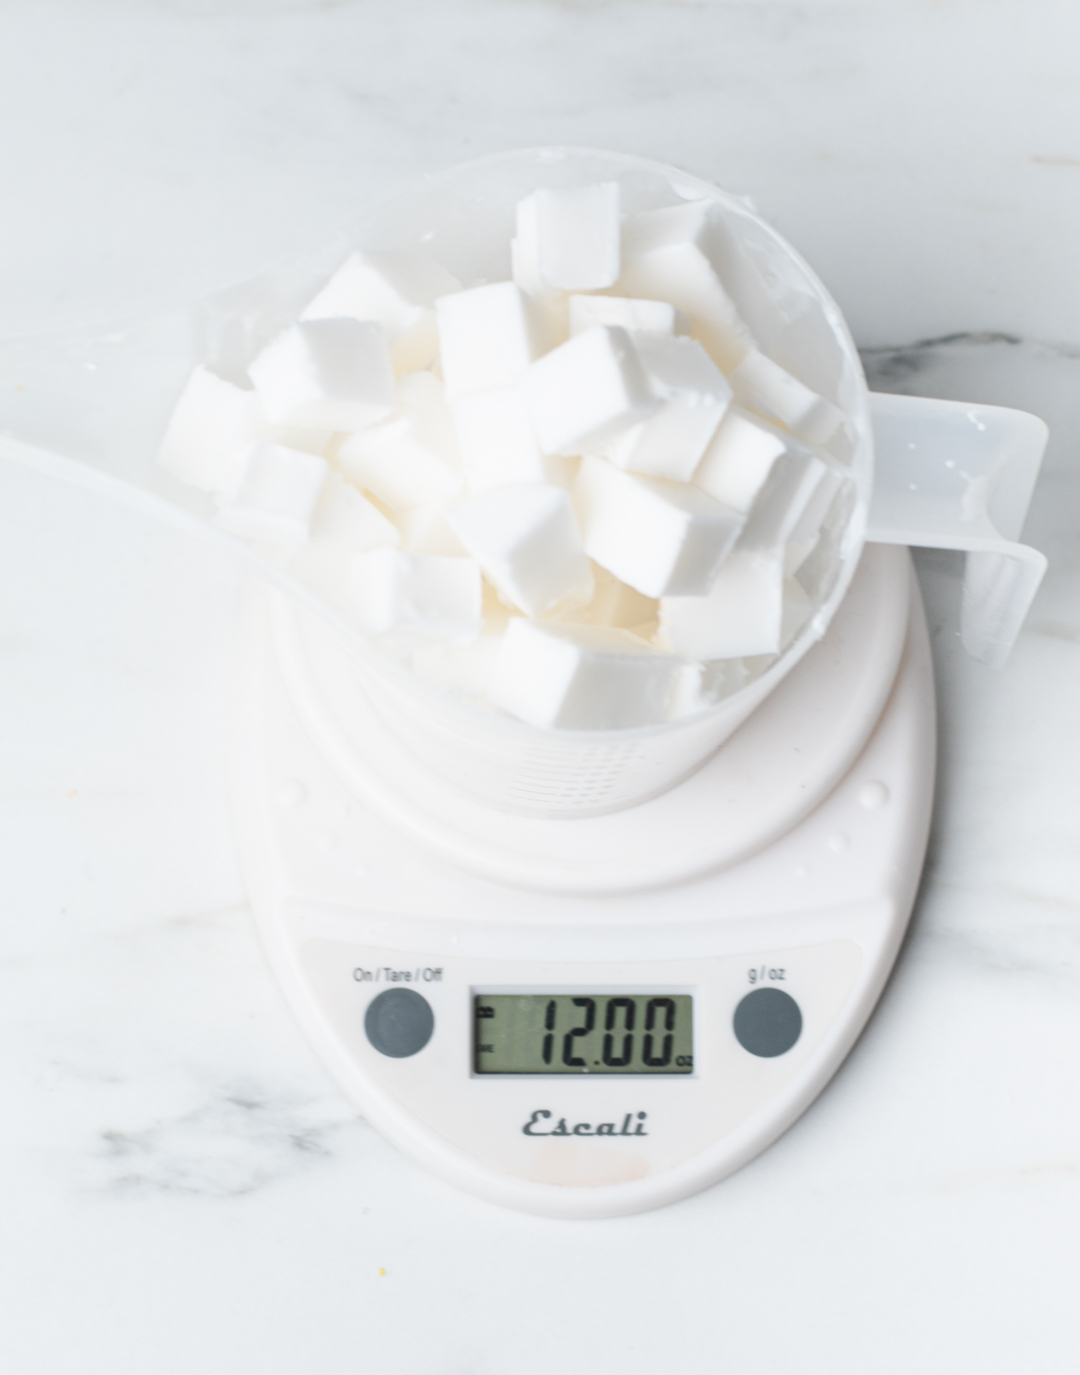 Weighing soap cubes on a digital scale.